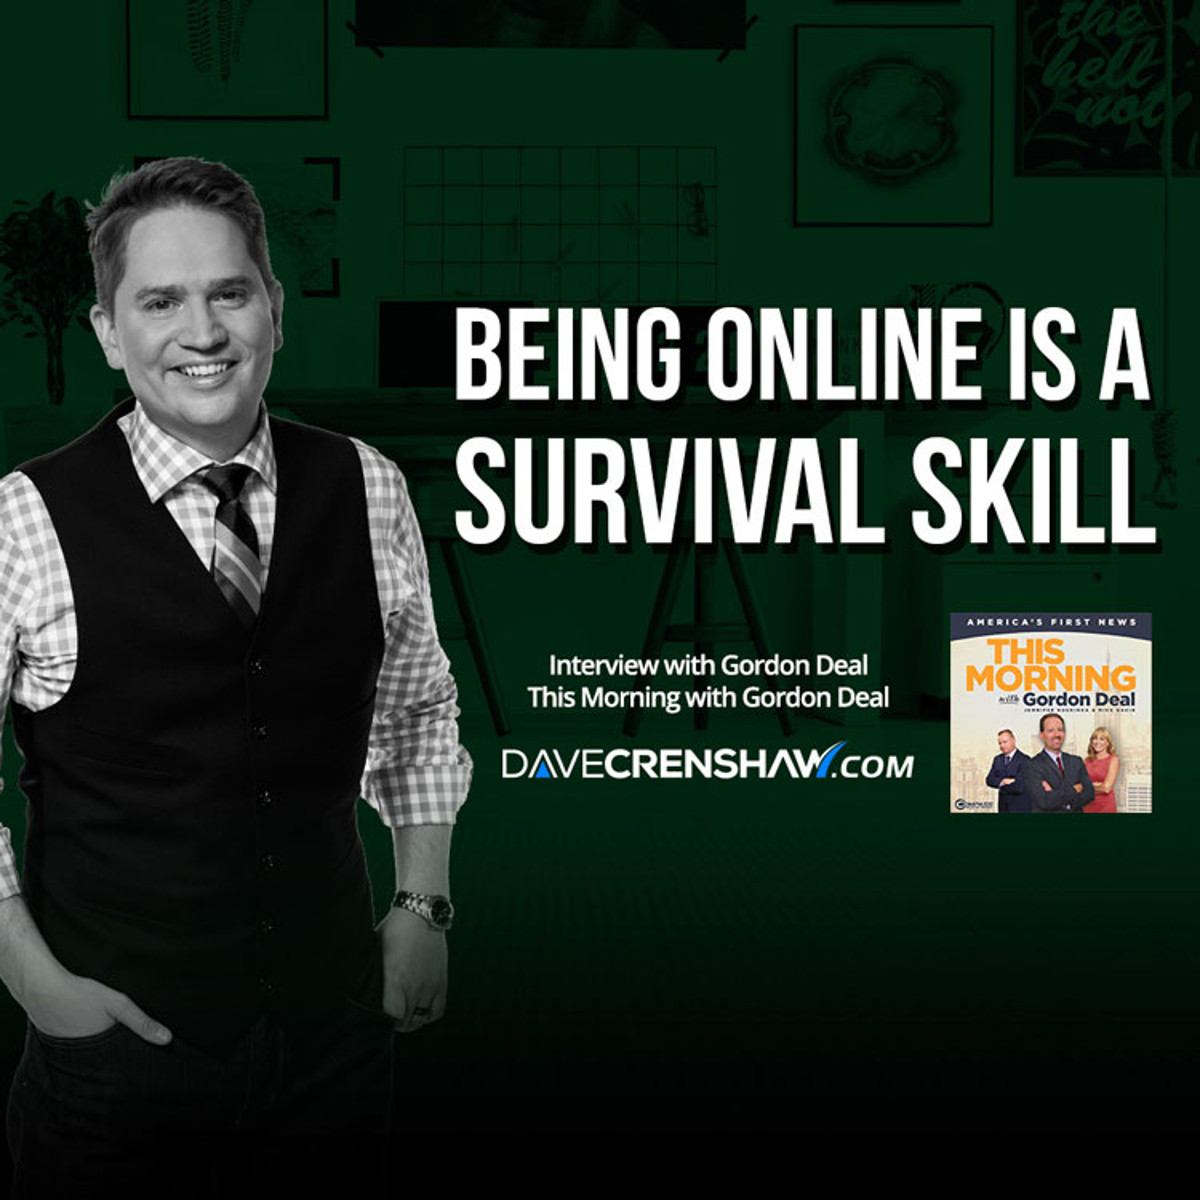 How being online is a survival skill in today’s job market